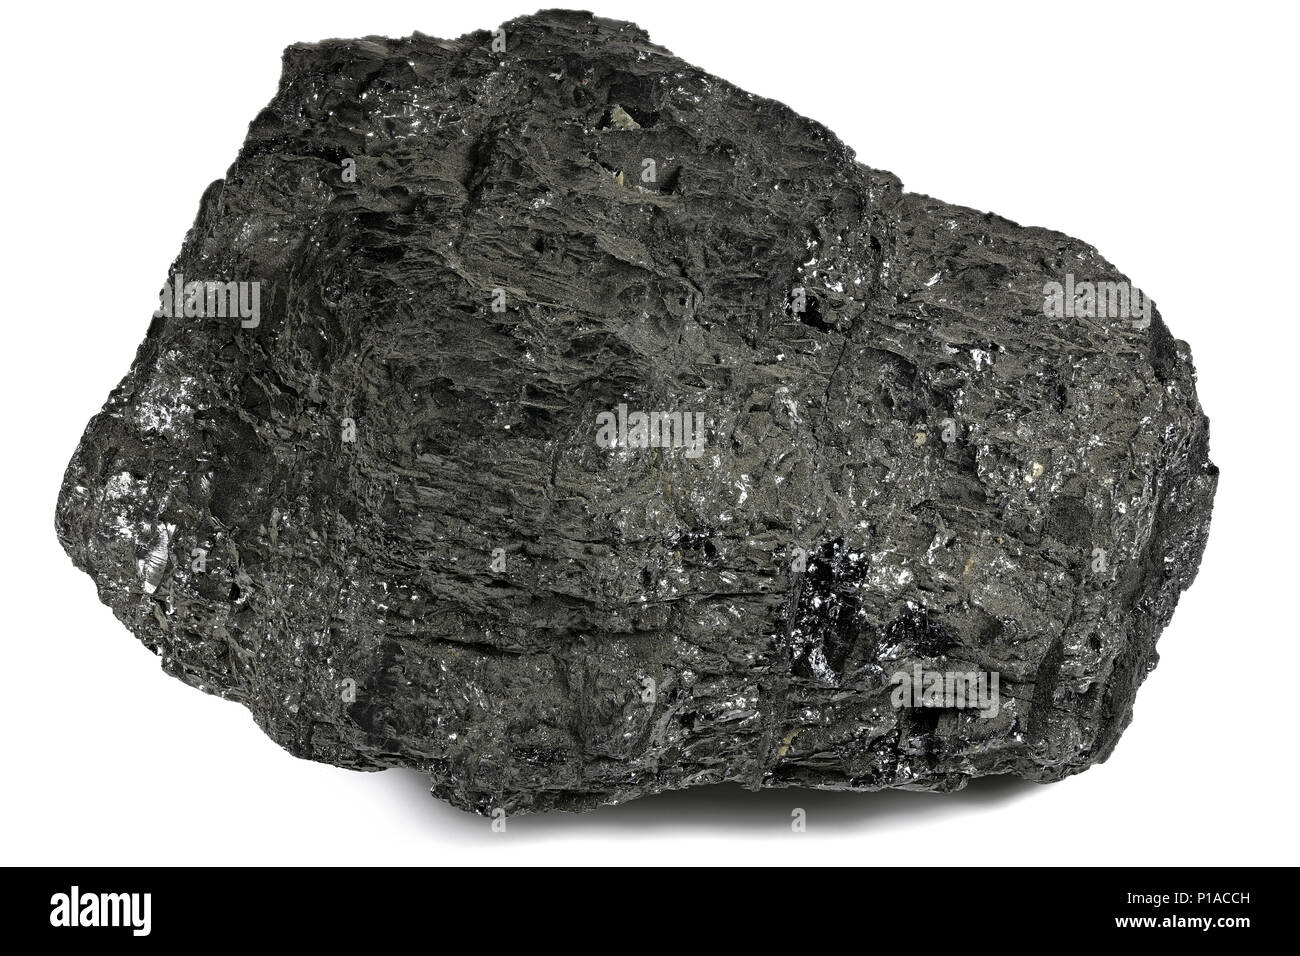 https://c8.alamy.com/comp/P1ACCH/lignite-brown-coal-from-bergheim-germany-isolated-on-white-background-P1ACCH.jpg